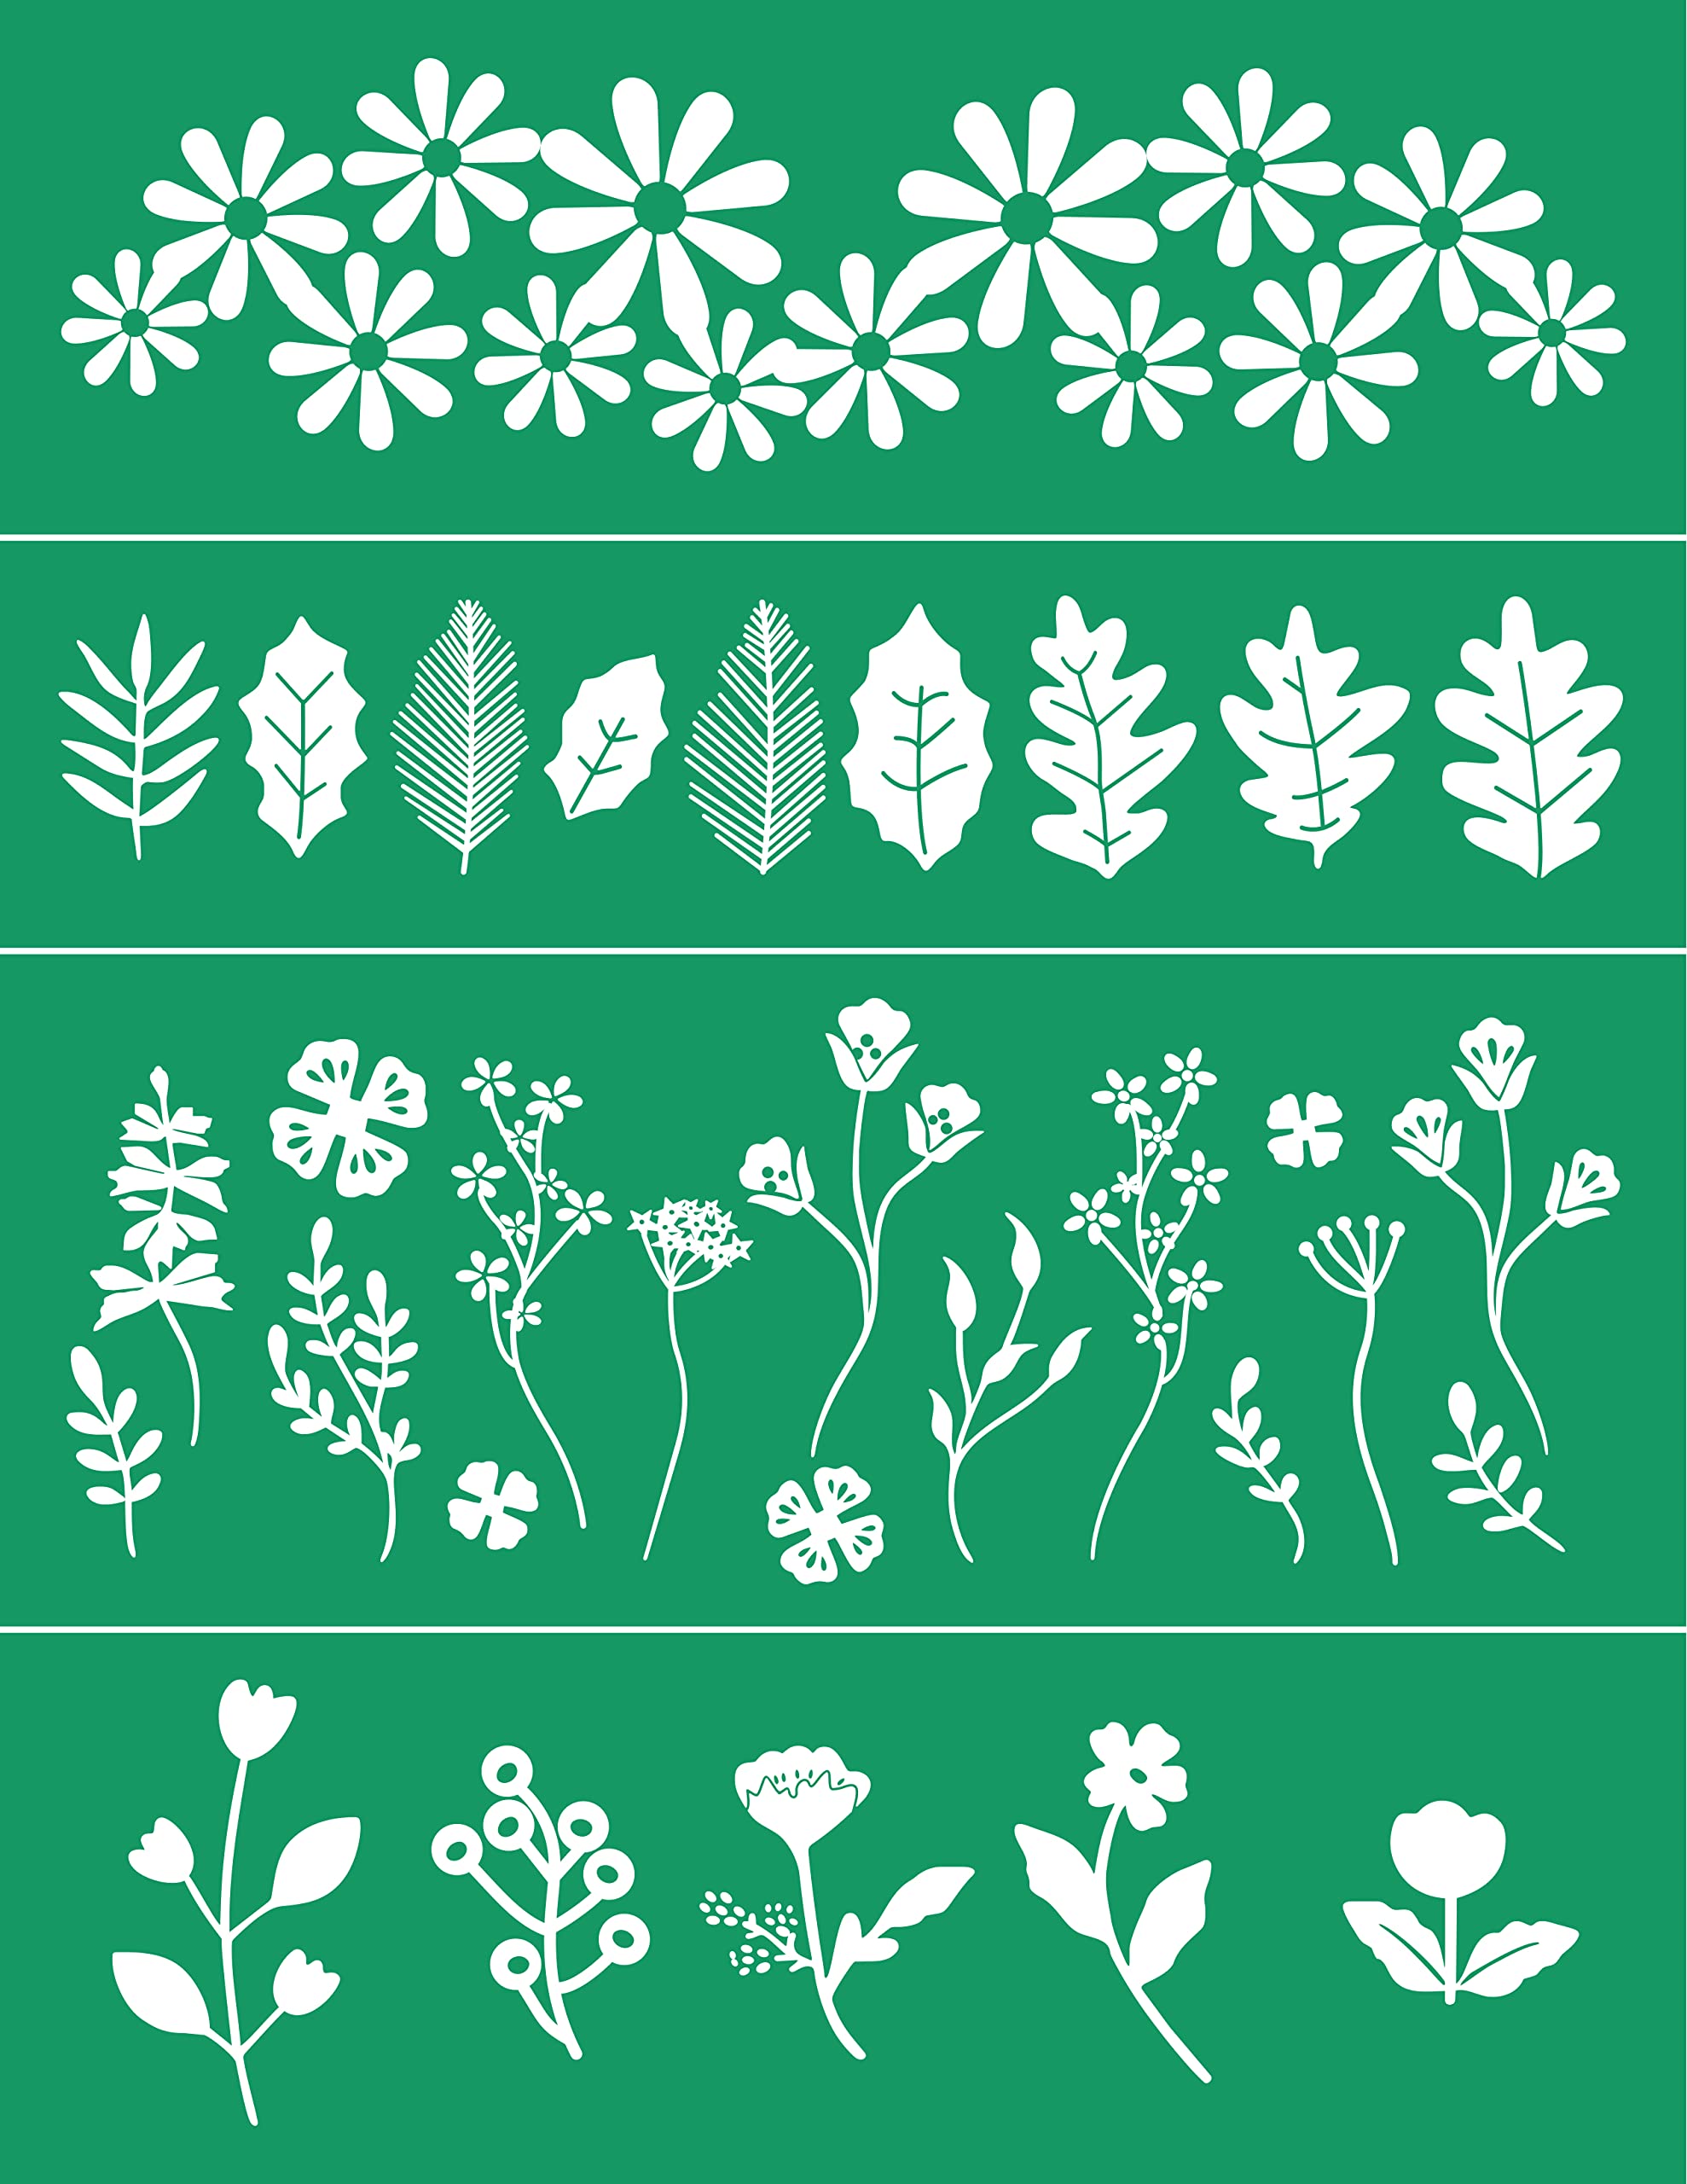 DGAGA Spring Flower Silk Screen Stencils Self Adhesive Leaf Screen Printing  Stencil for Chalk Paste Reusable Chalk Mesh Transfers Stencils for Painting  on Wood Fabric Garden Decor flowers and leaf stencils 8.5x11